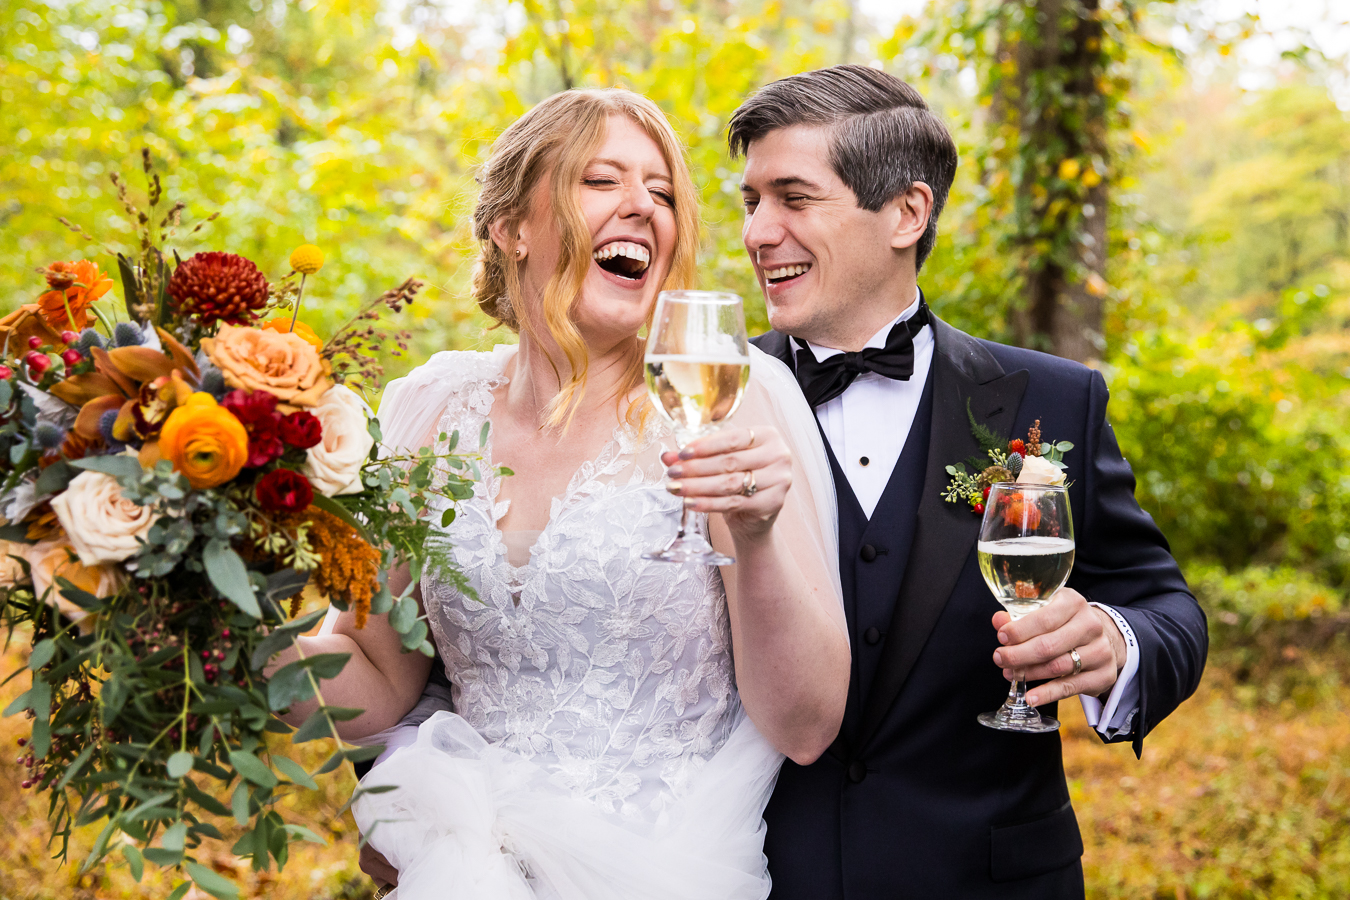 Elizabeth Furnace Wedding photographer, lisa rhinehart, captures this joyful, vibrant moment between the bride and groom as they smile and laugh at each other as they hold their wine glasses outside in the woods for this rainy day wedding ceremony in lititz, pa 